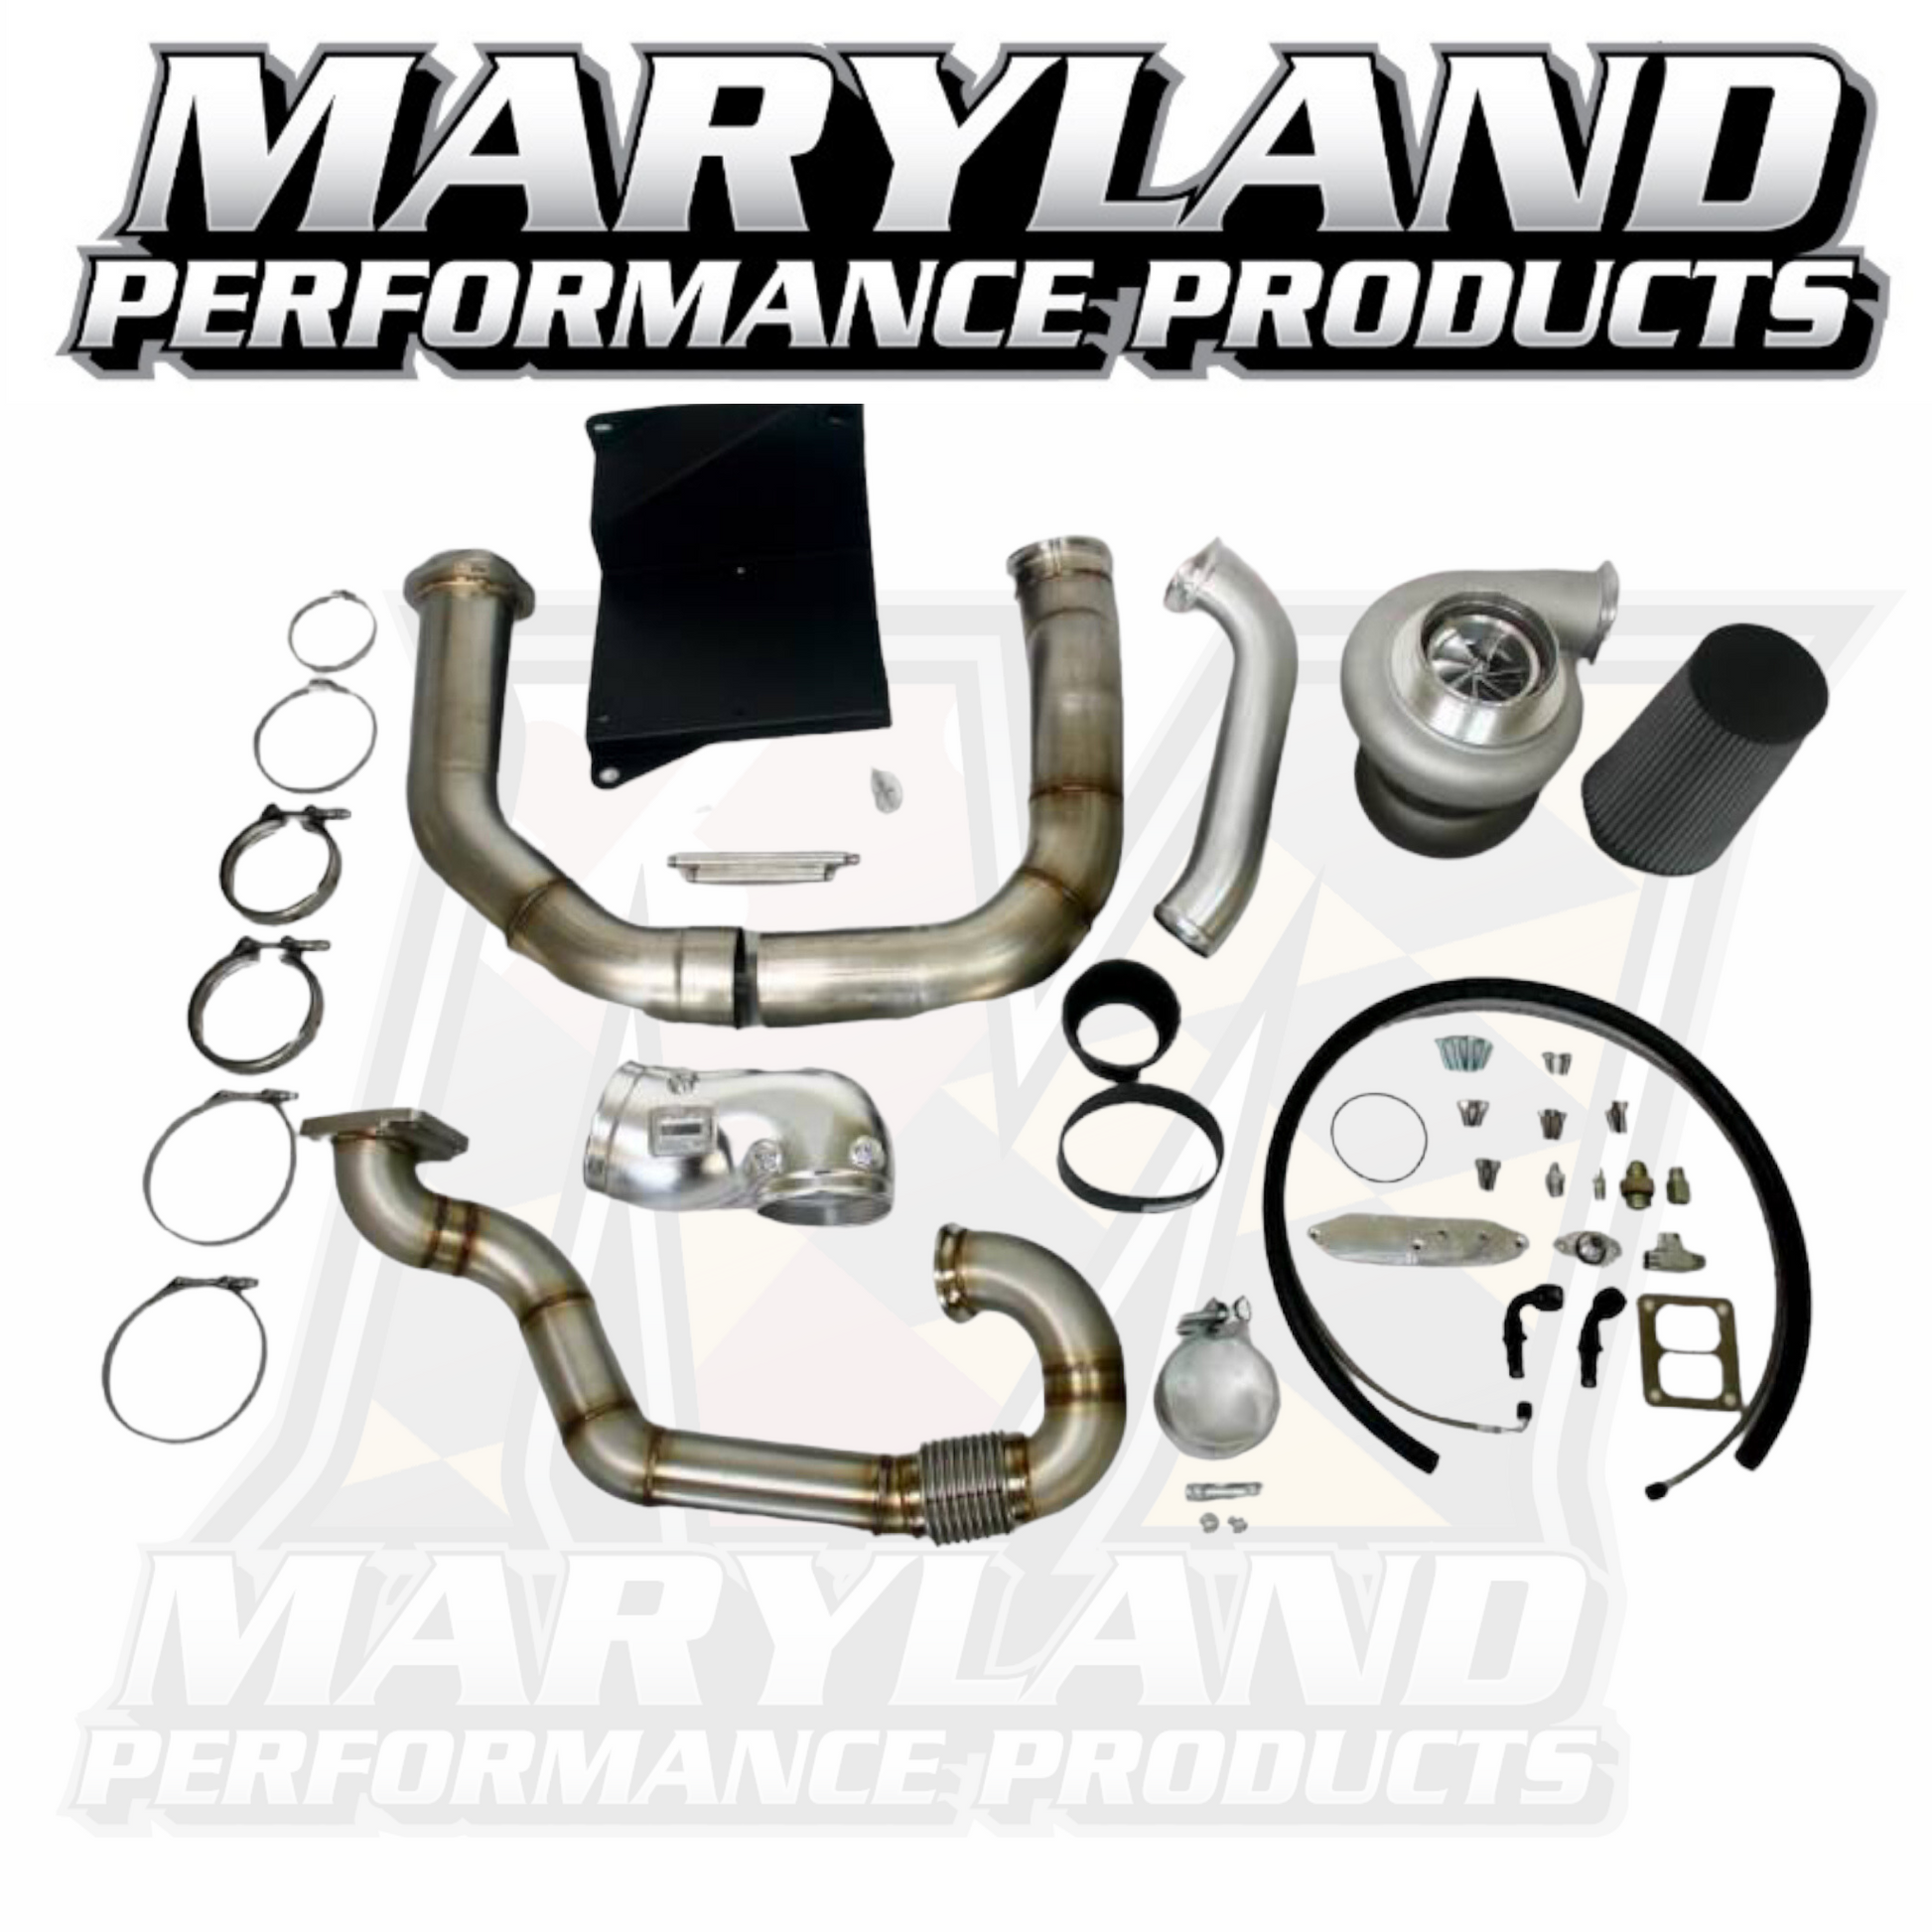 MPP 6.7L Power Stroke Compound kit – Maryland Performance Products